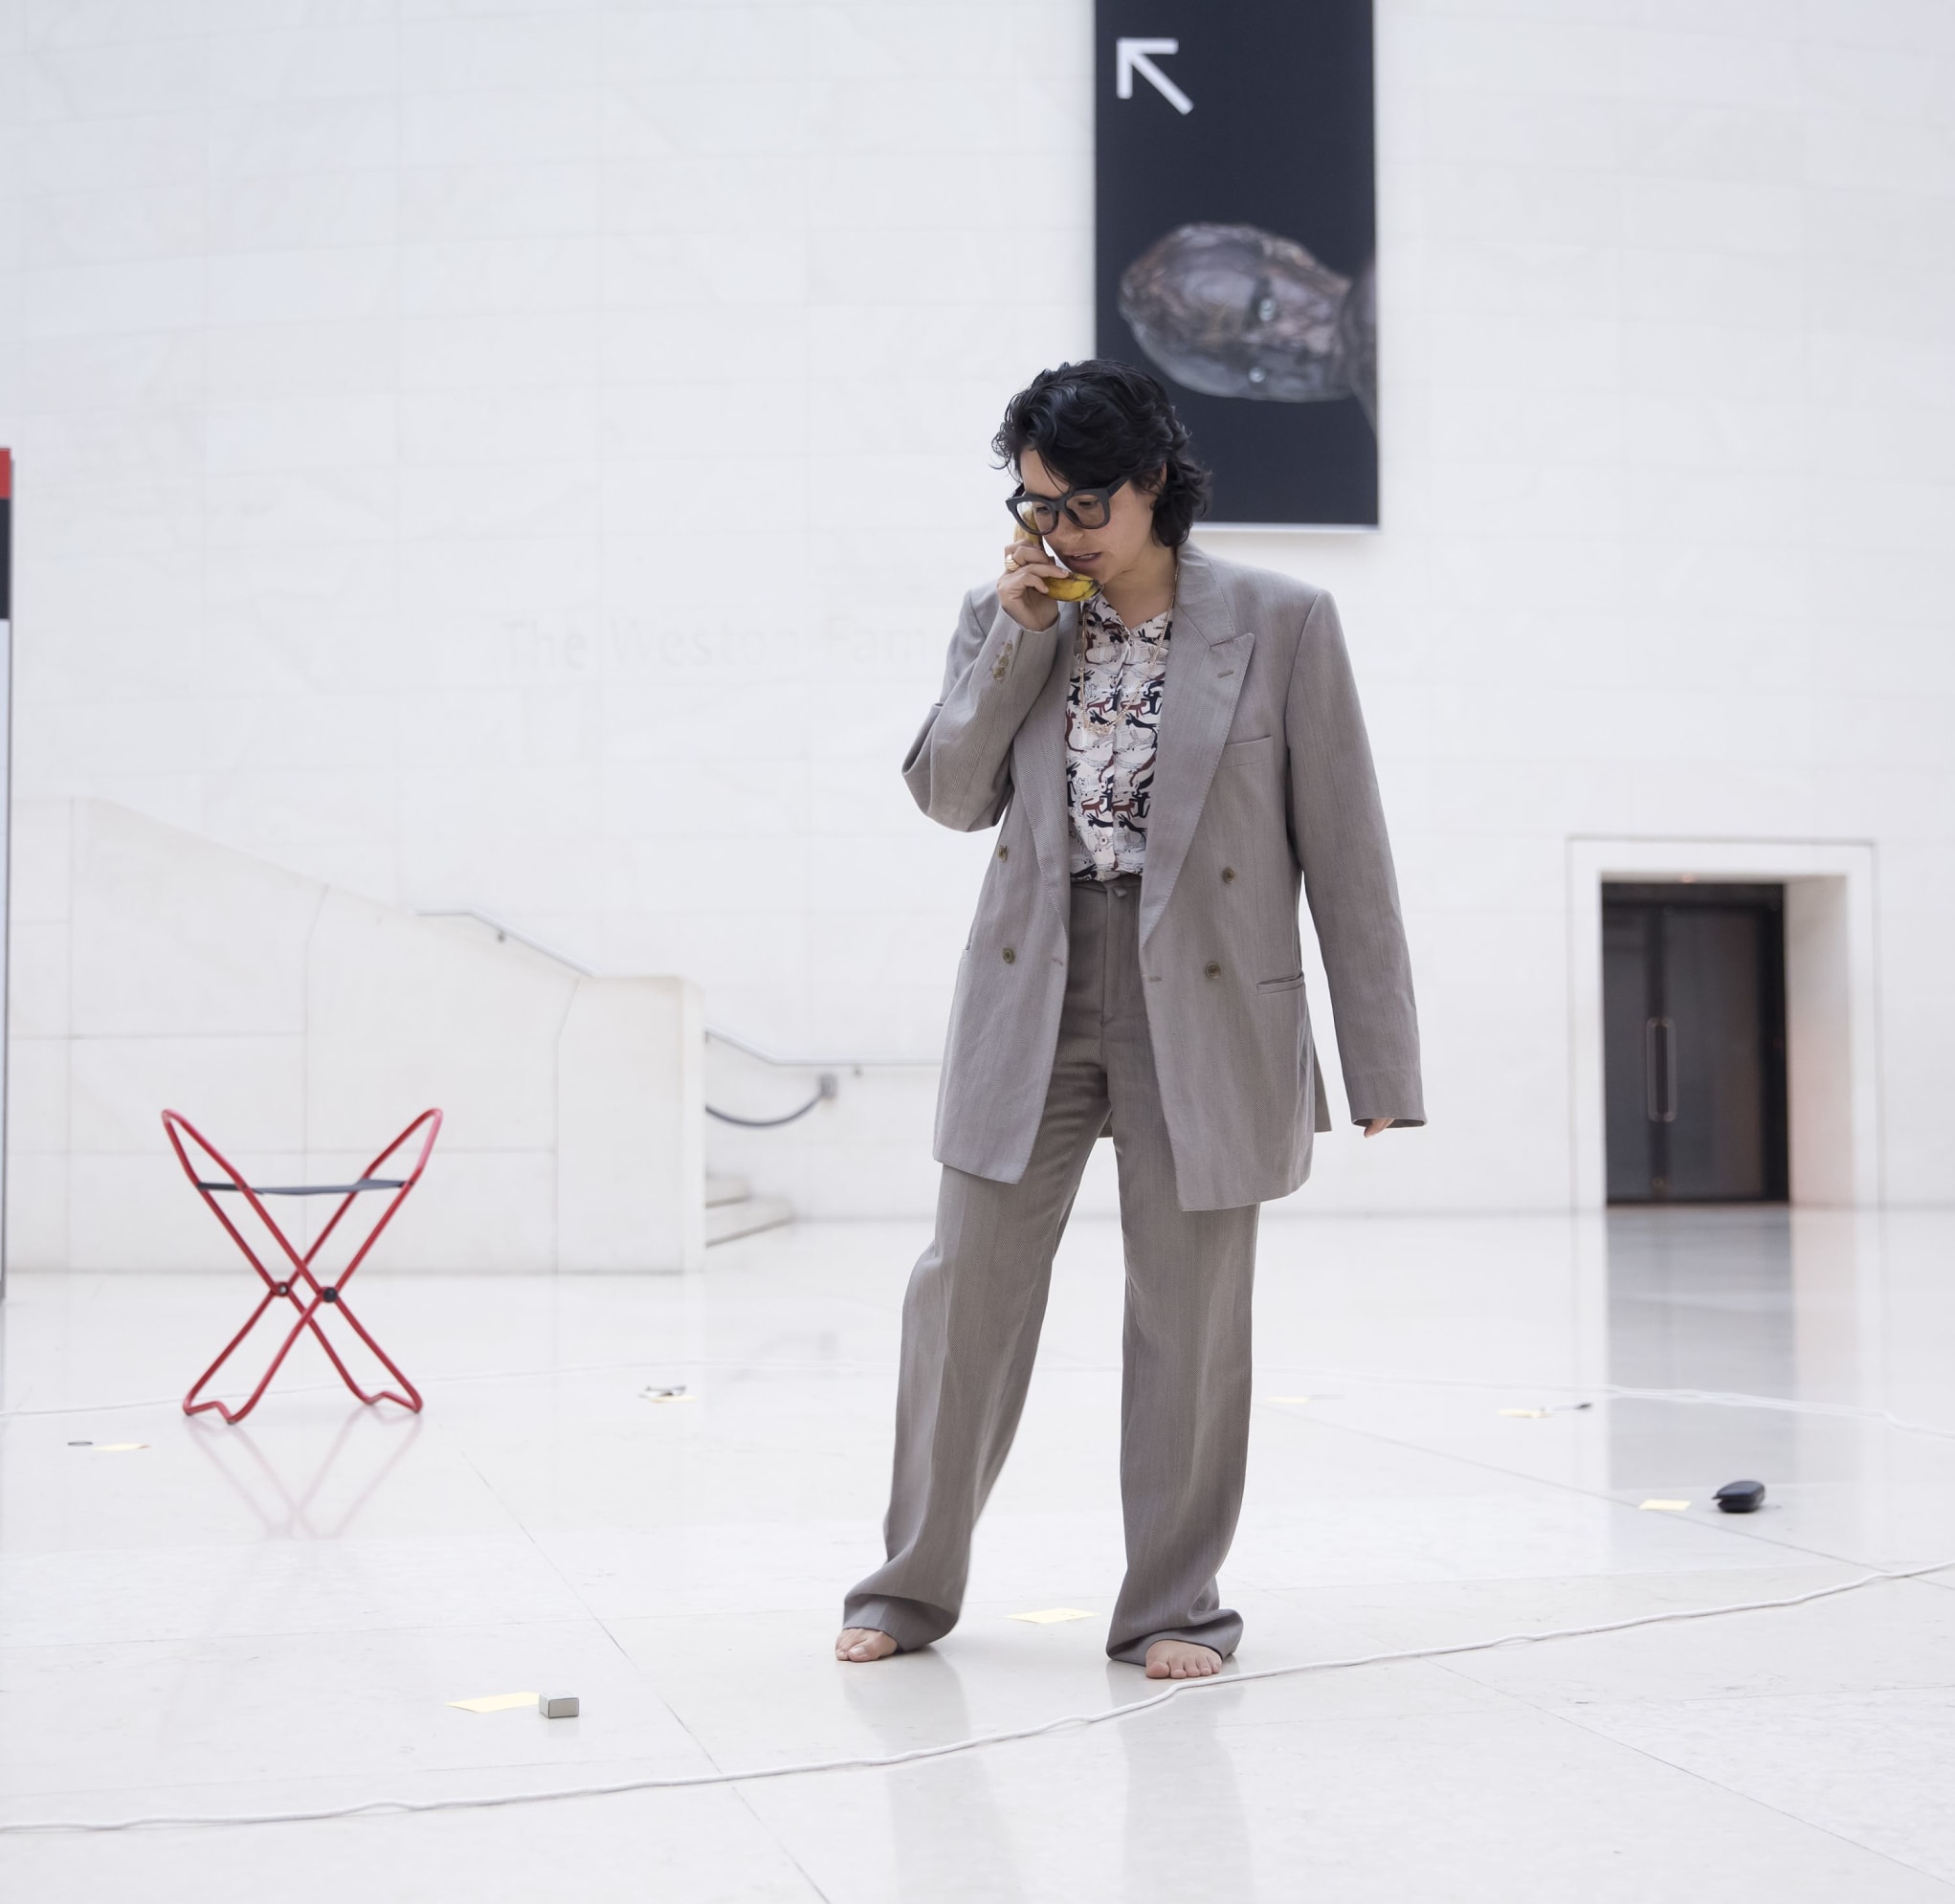 Photo by Rachel Cherry. Dre stands in a large grand foyer area pretending to be on the phone with a banana instead of a mobile. They wear an over-sized grey suit and thick rimmed glasses. A lone red folding stool is placed nearby in the background.